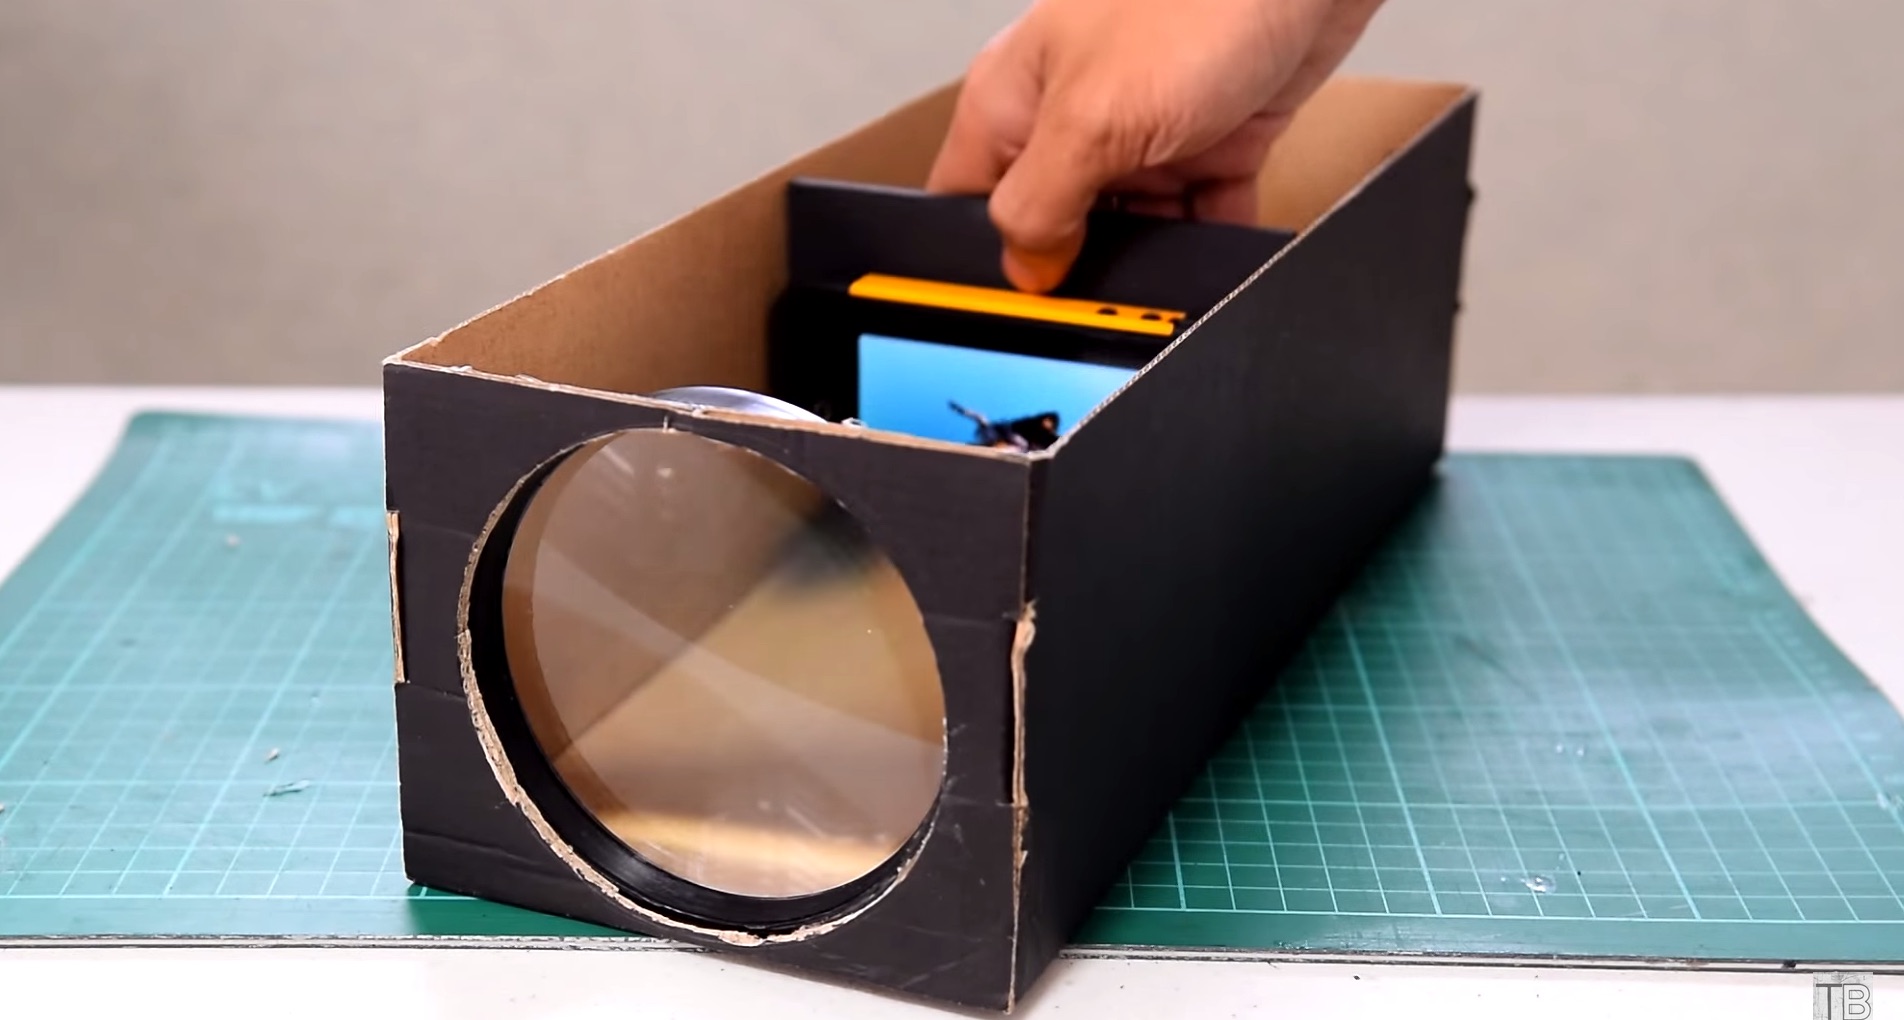 How To Make A Homemade Projector